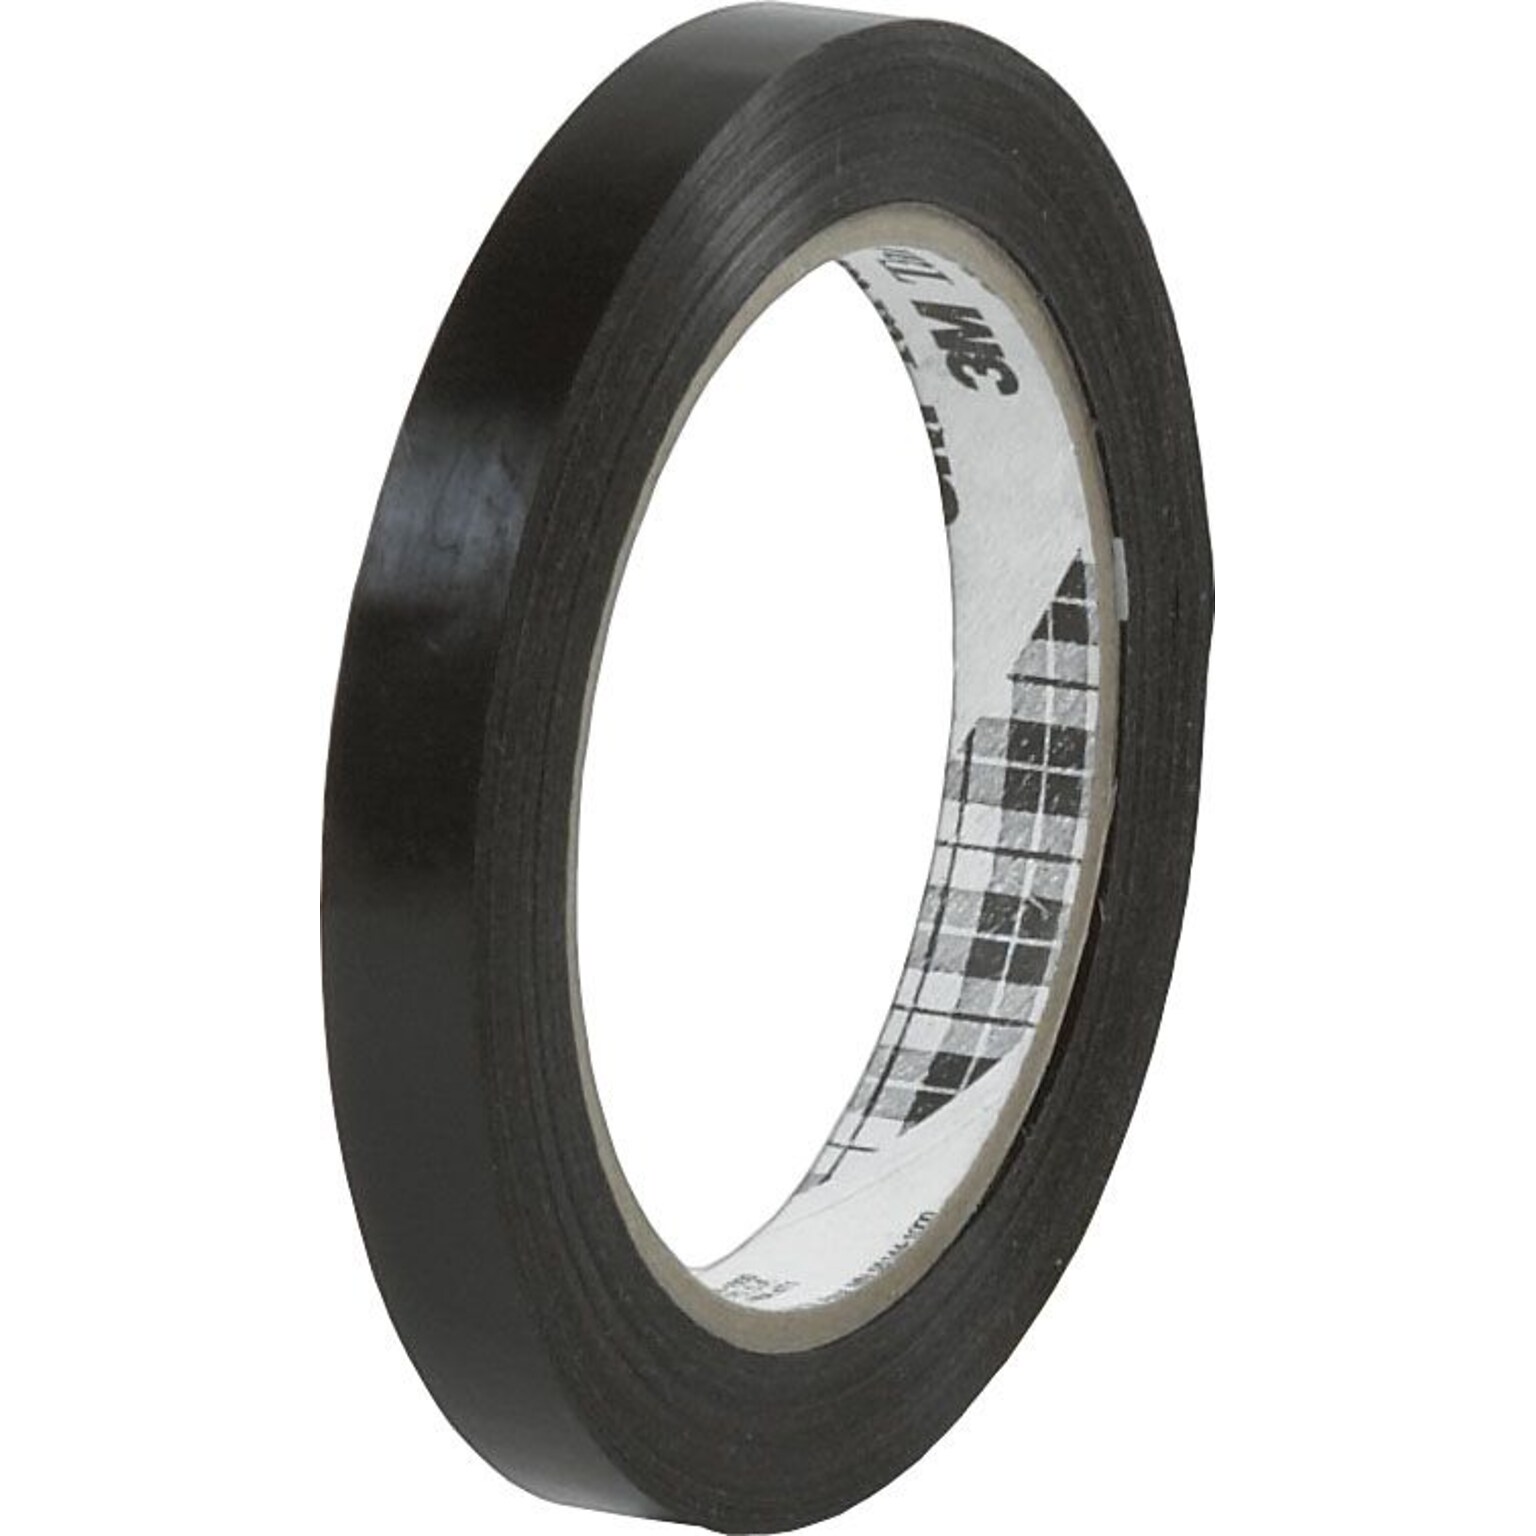 3M™ 860 Tensilized Poly Strapping Tape, 1/2 x 60 yds., Black, 144/Case